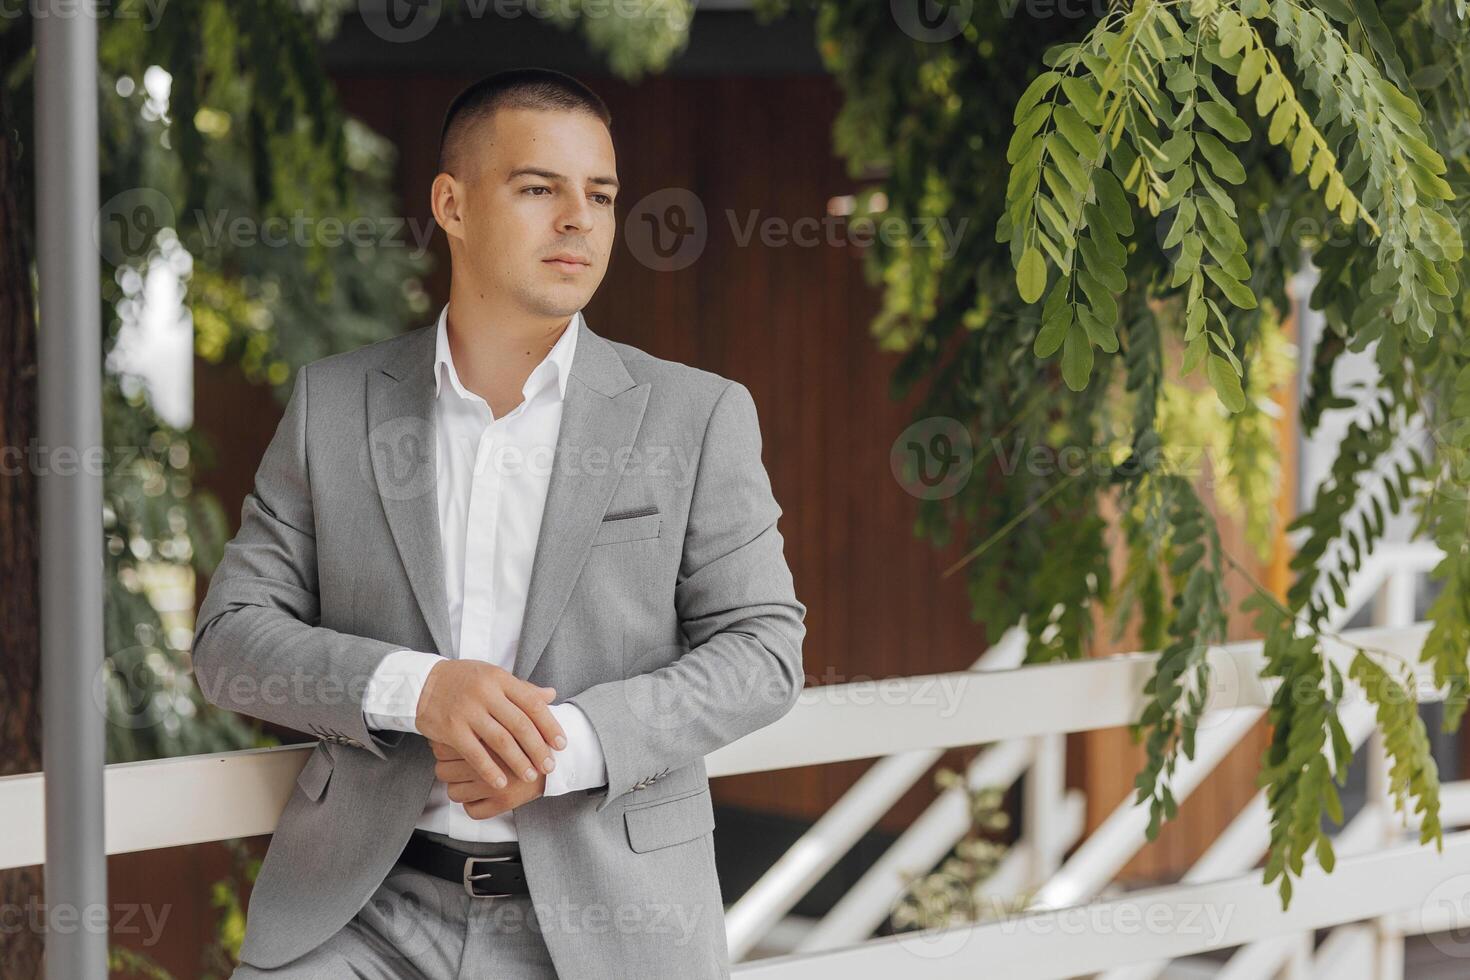 Handsome successful young man wearing gray suit, white shirt, sunglasses and posing near green trees. photo